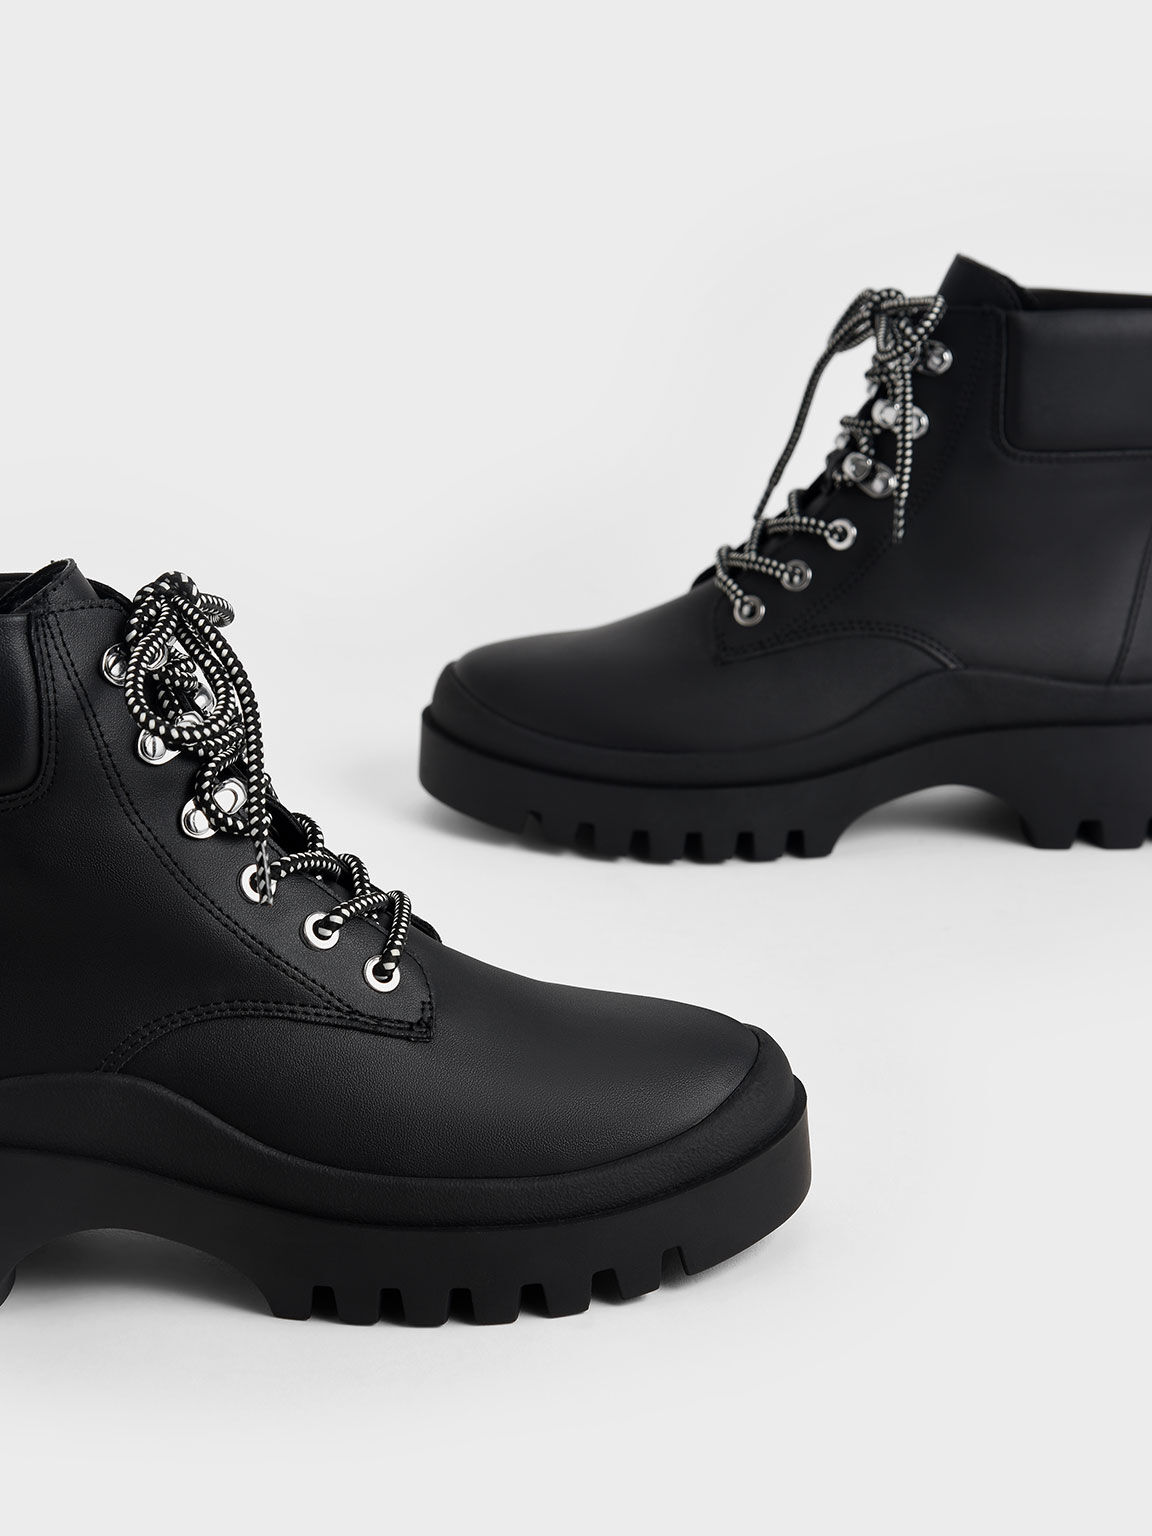 Lace-Up Gripped Sole Ankle Boots, Black, hi-res